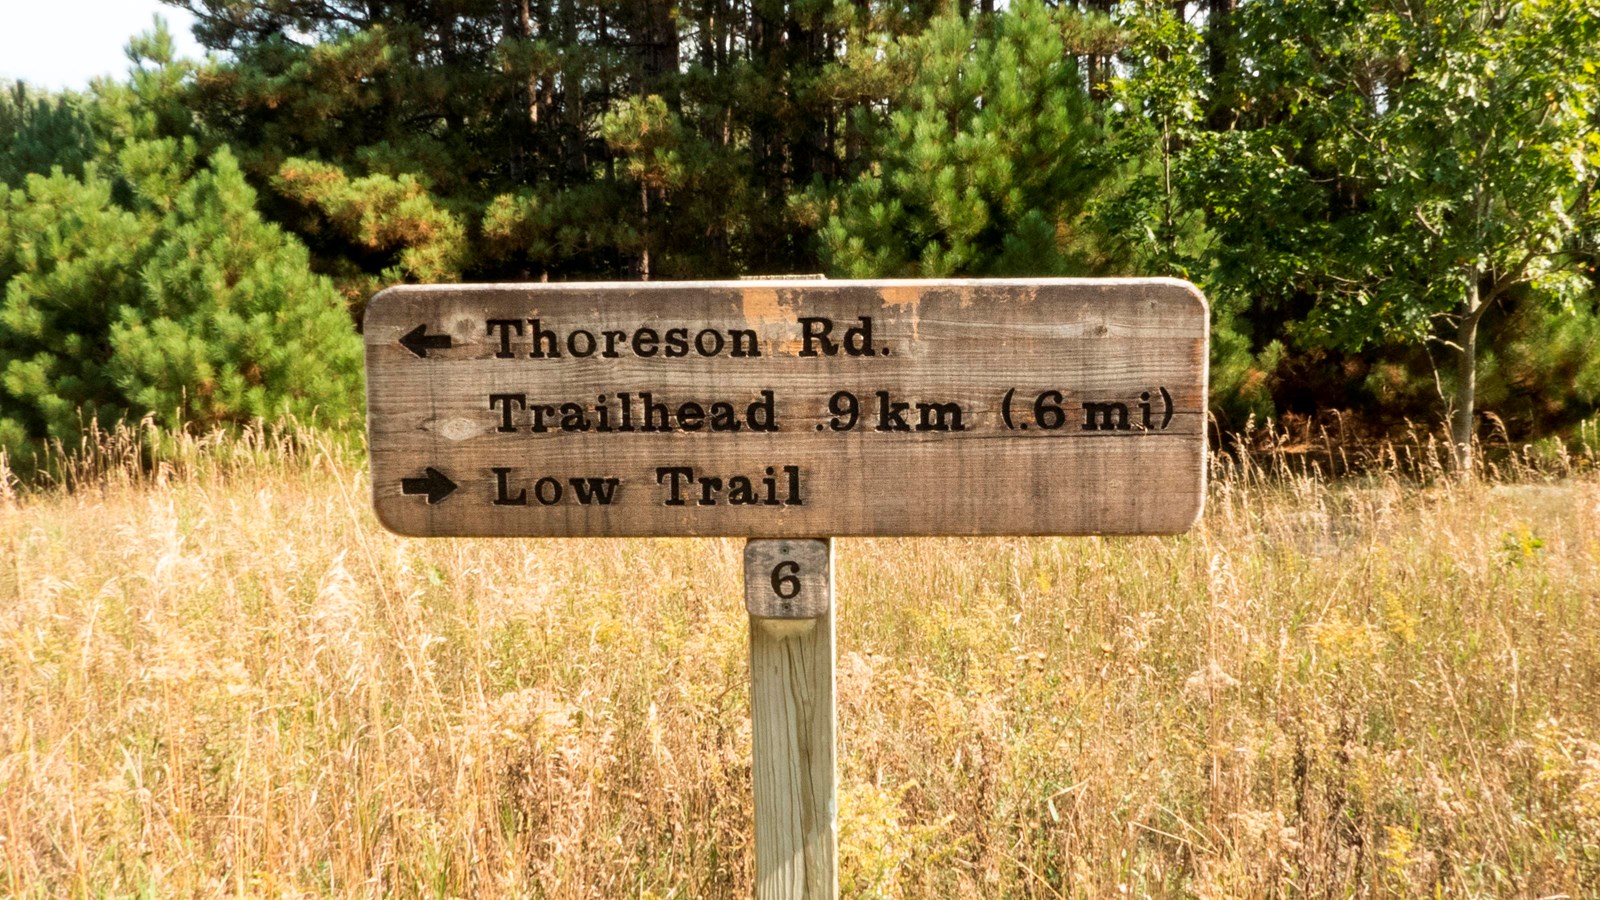 A wooden sign with text. Arrow to left Thoreson Rd. Trailhead .9km (.6mi).  Arrow to right Low Trail